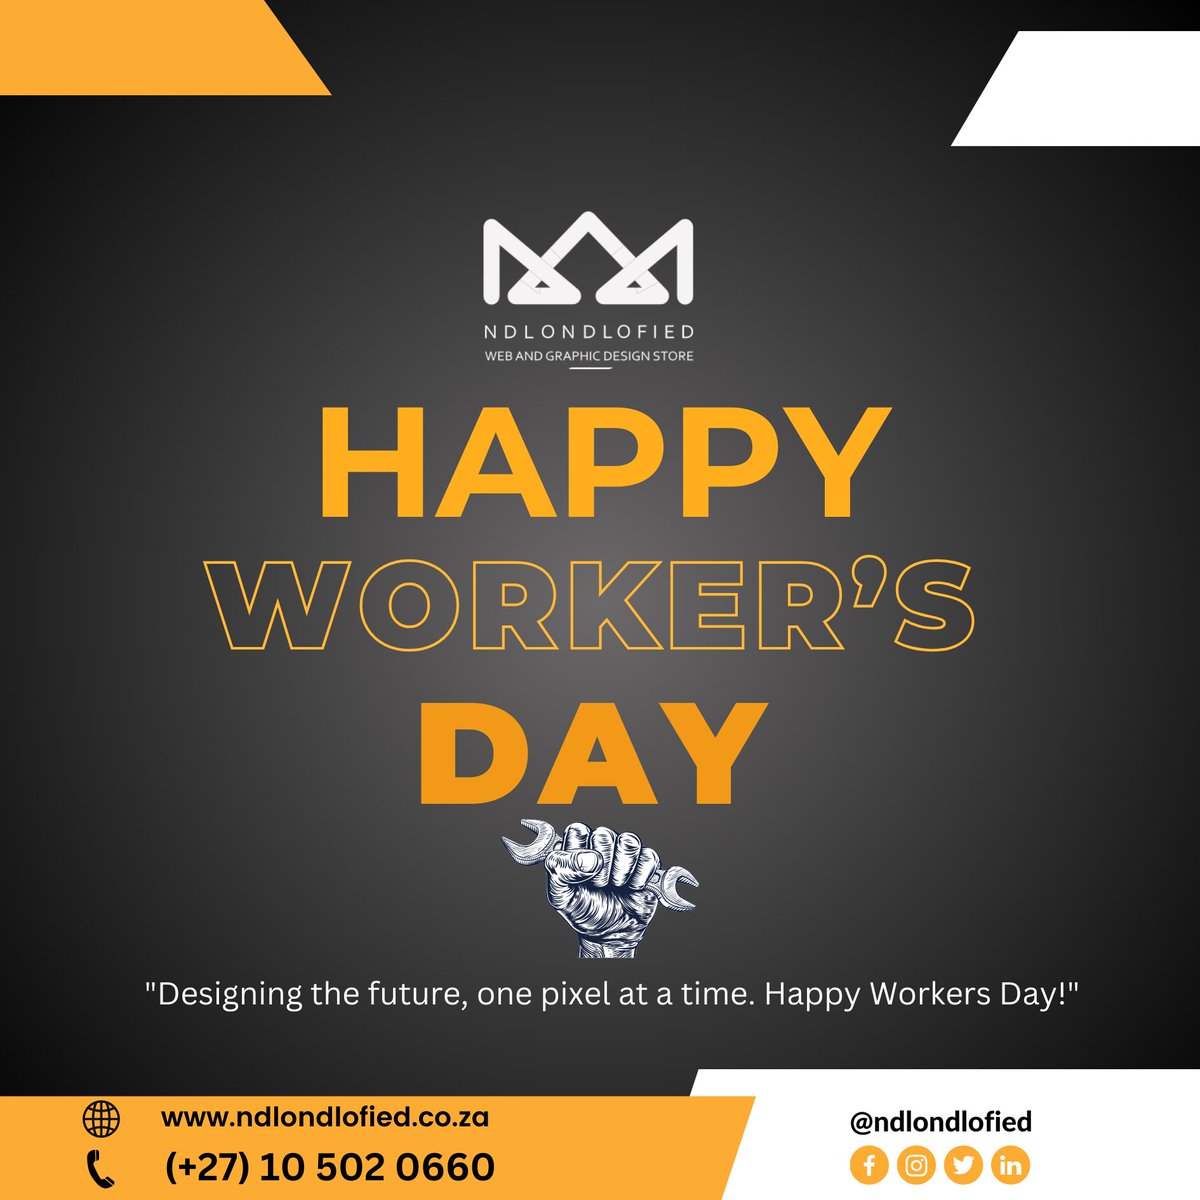 🎉 Happy Workers' Day! 🎉

Today we celebrate the hard work and dedication of every individual contributing to their respective fields. 
💼#WorkersDay #NdlondlofiedDesigns #CelebrateWork #GraphicDesign #DigitalMarketing #BrandDevelopment #ndlondlofied #StayNdlondlofied